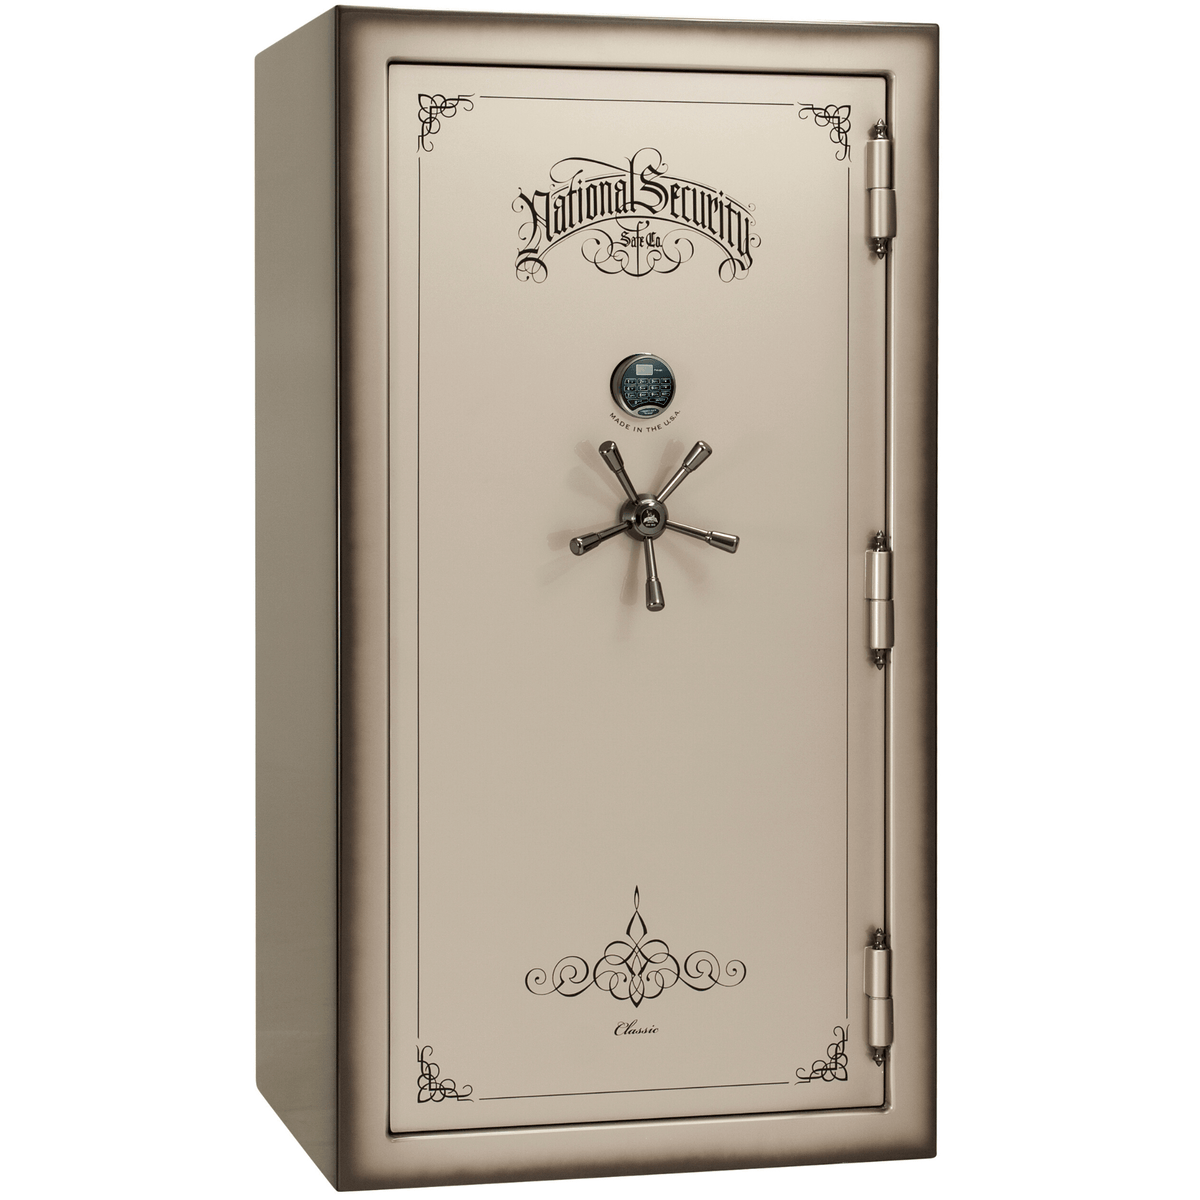 Liberty Safe Classic Plus 40 in Feathered Champagne Gloss with Black Chrome Electronic Lock, closed door.